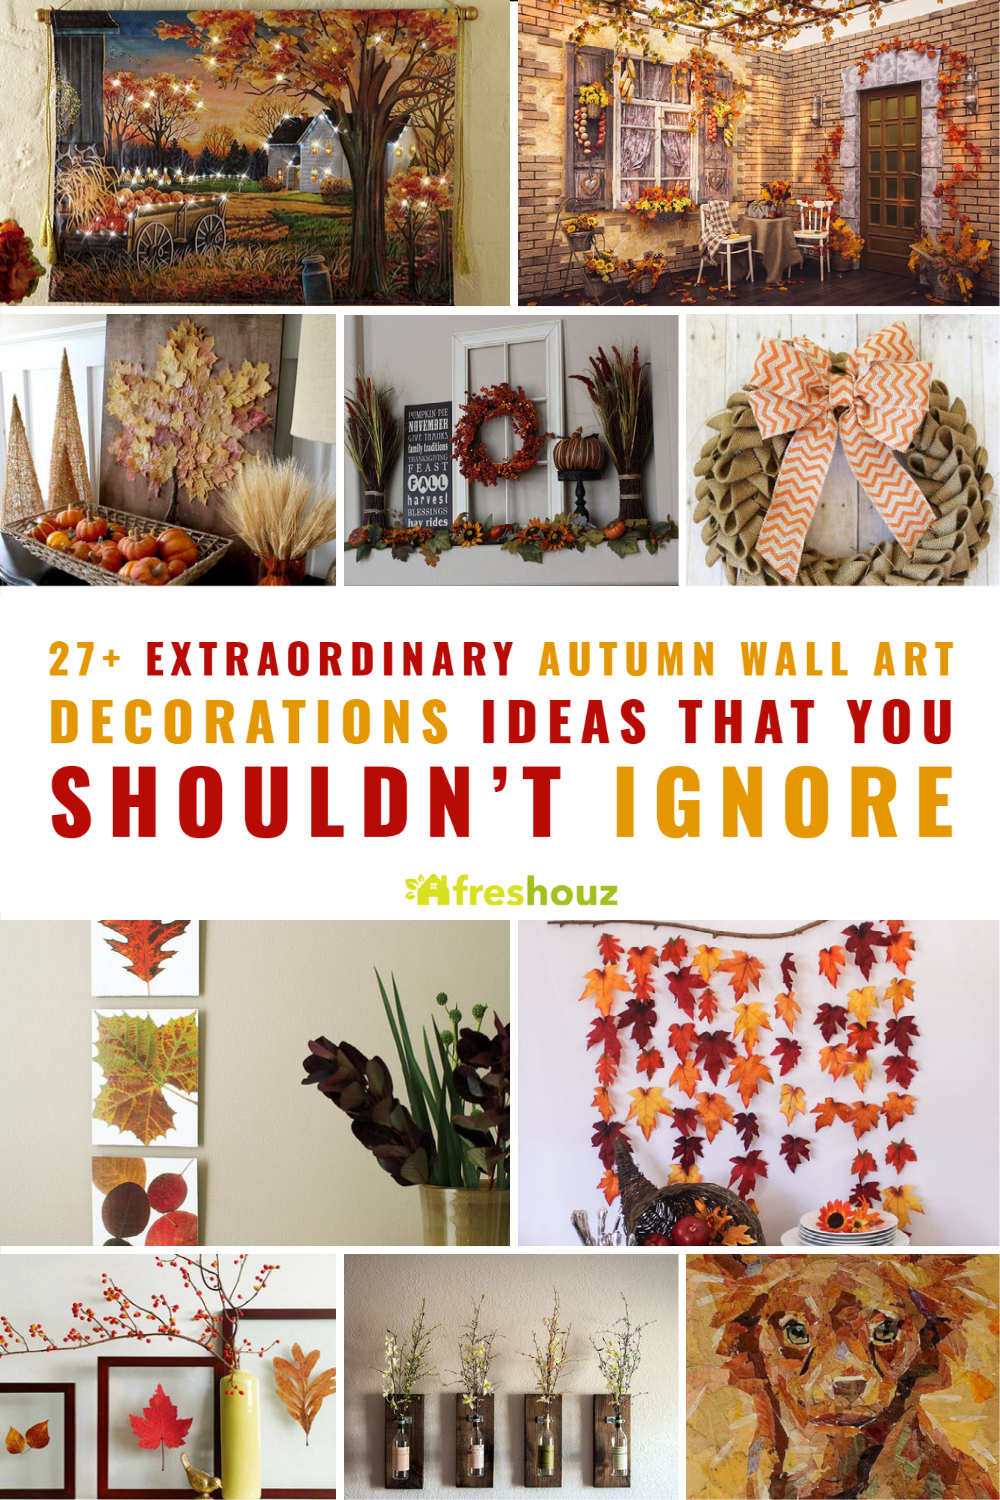 27+ Extraordinary Autumn Wall Art Decorations Ideas That You Shouldn't Ignore